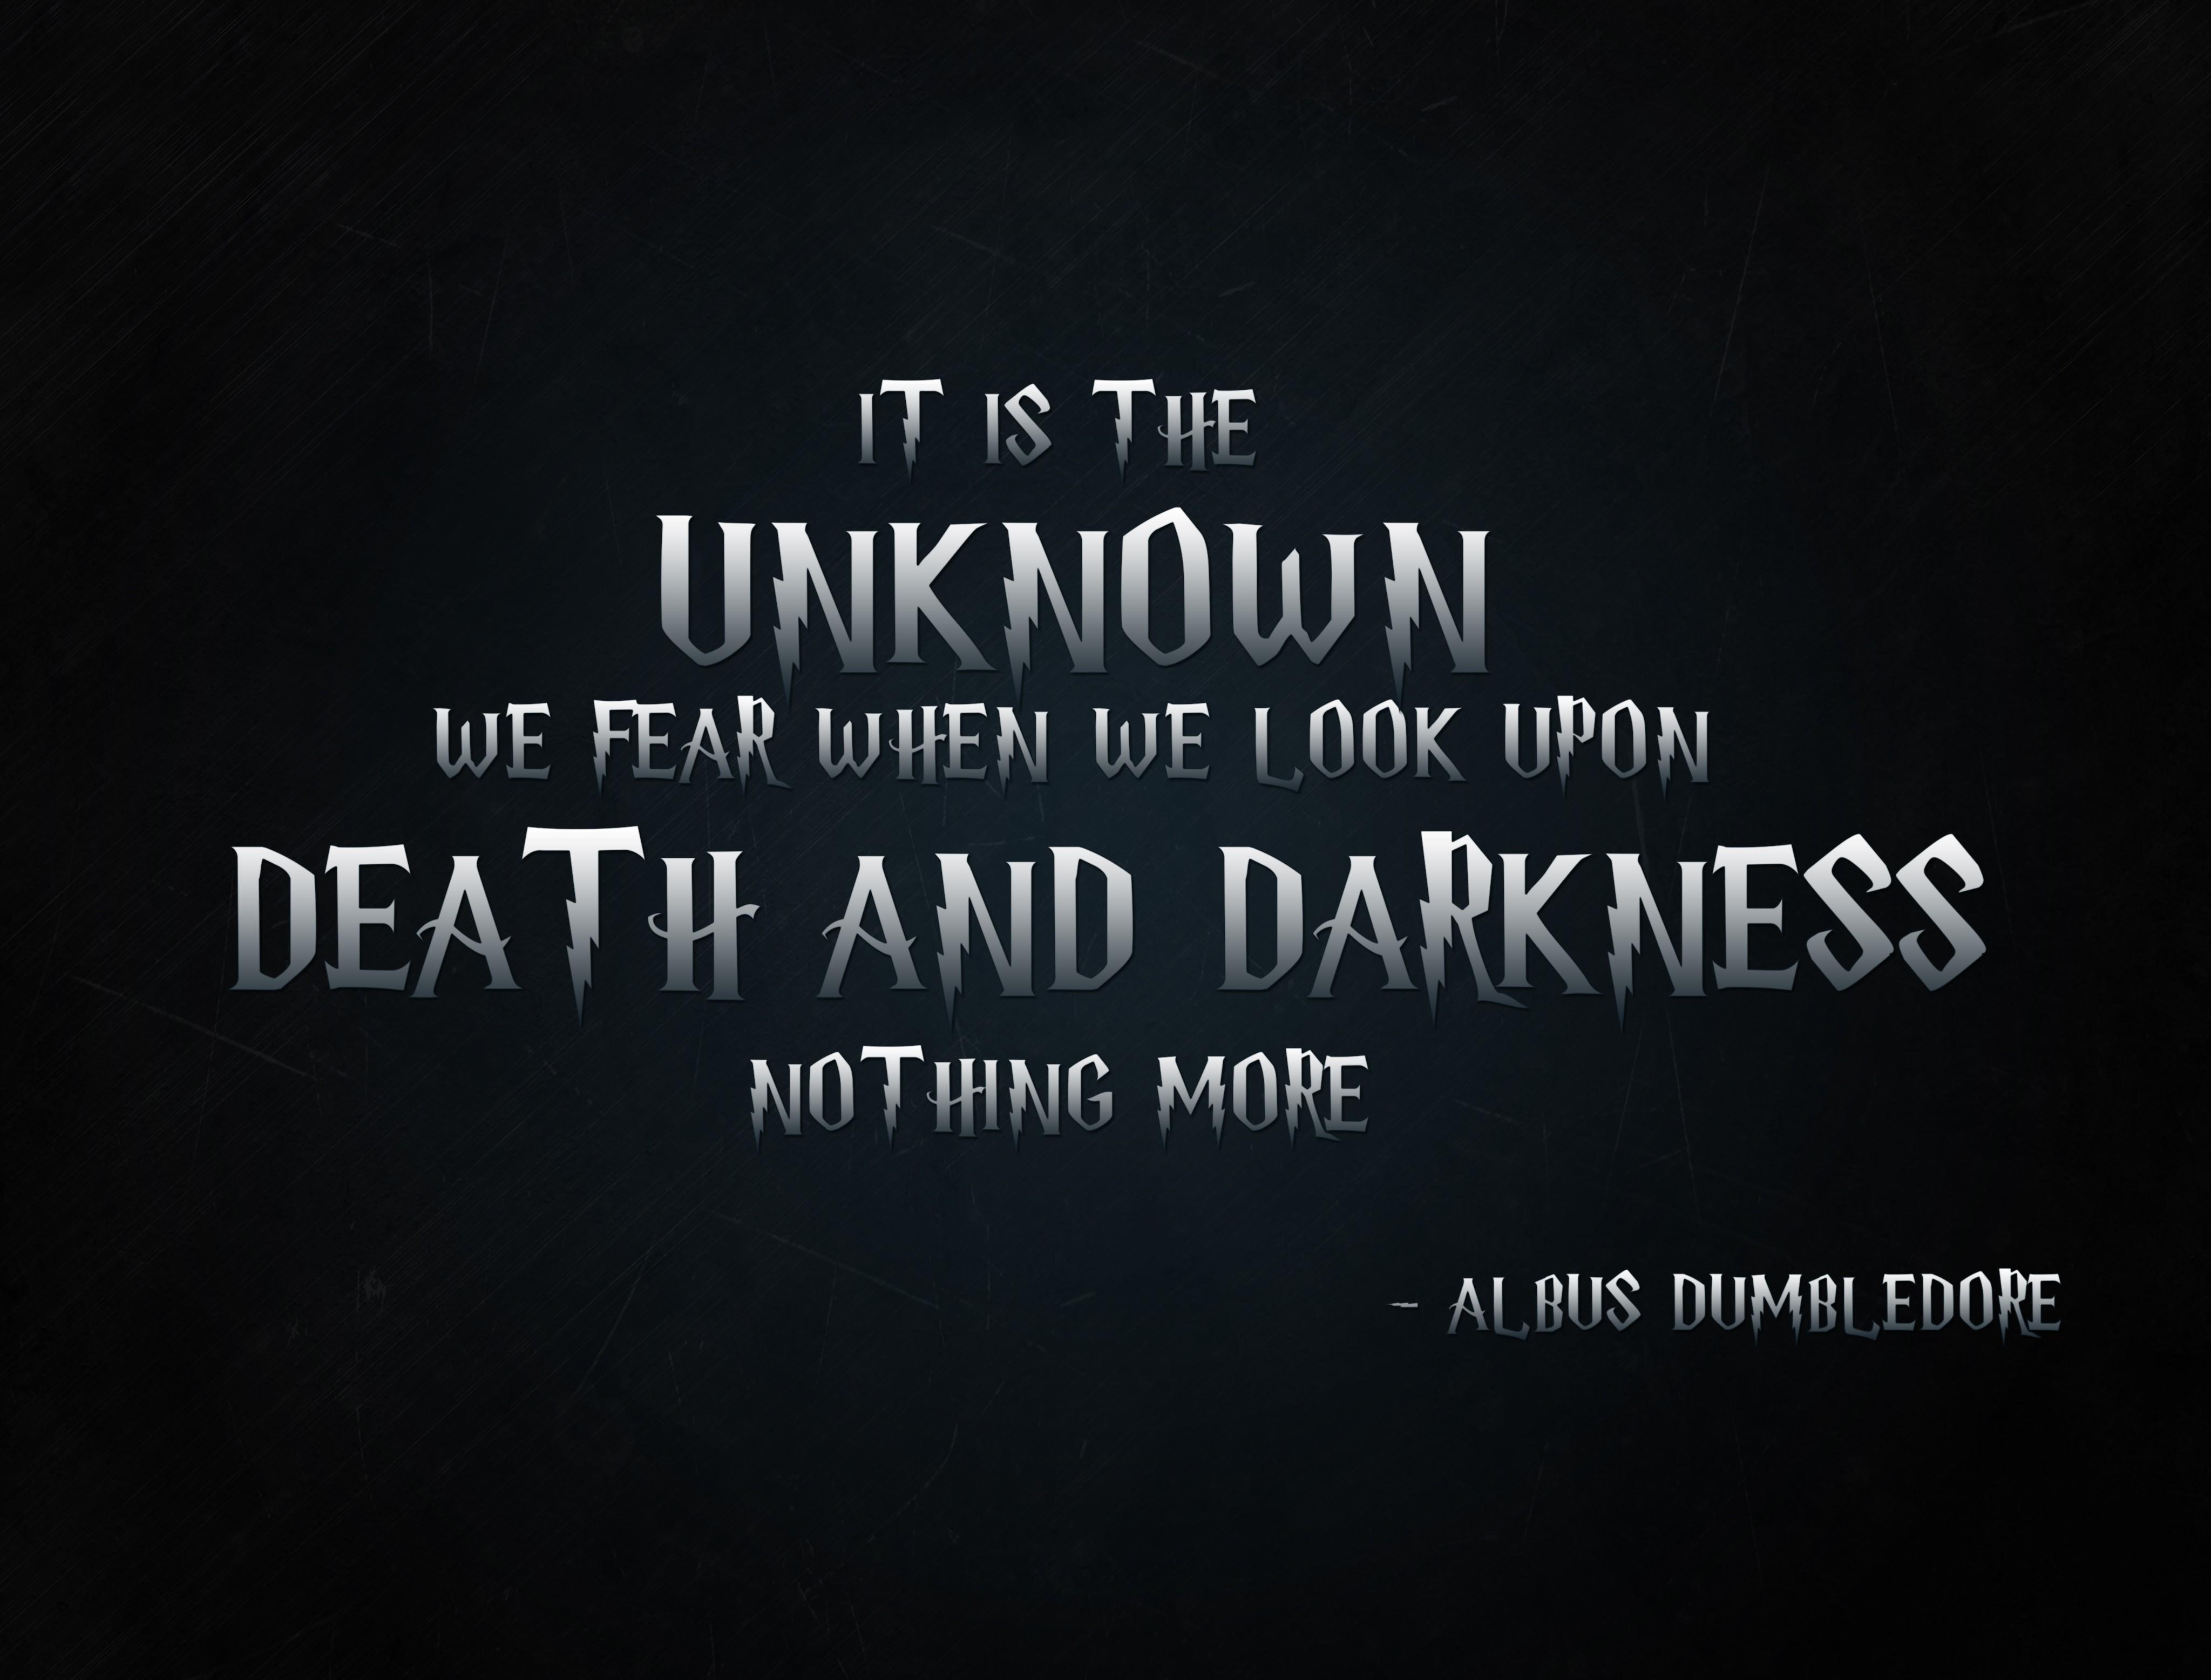 Albus Dumbledore, Harry Potter, Quote, Harry Potter and the Half